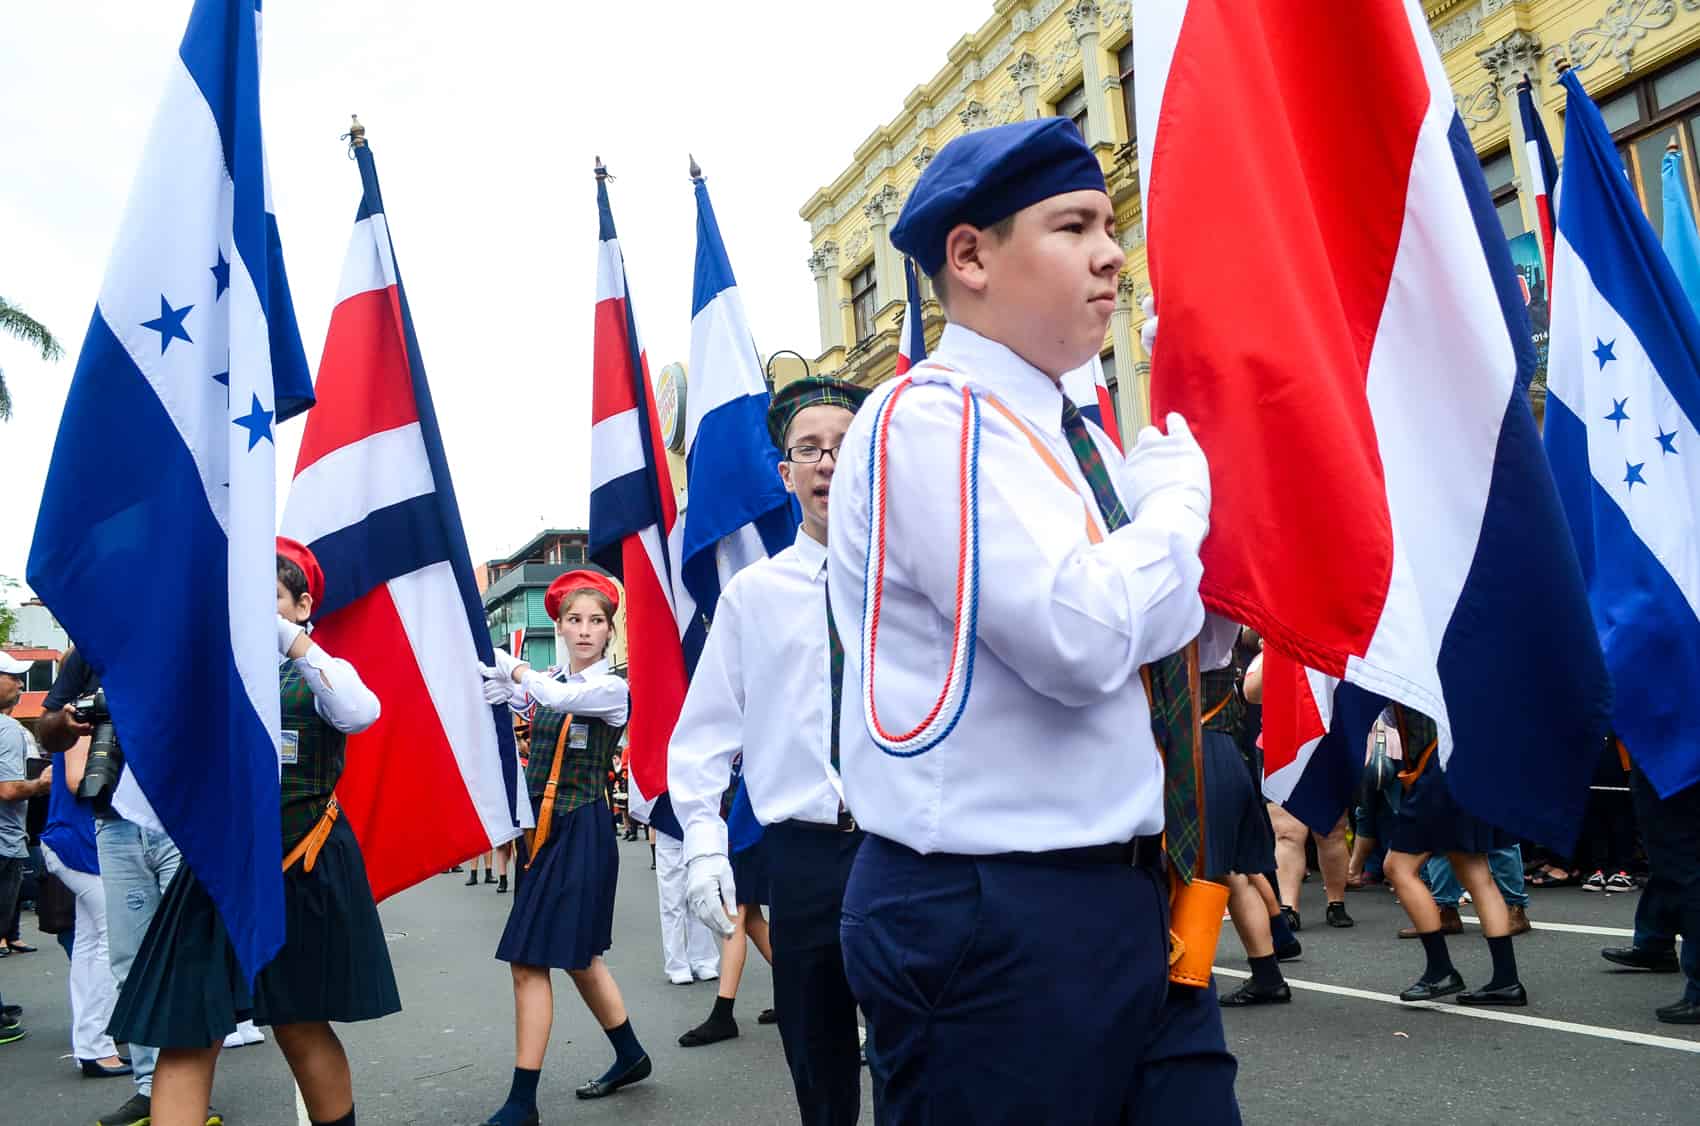 The traditional Costa Rica Independence Day march in San José.